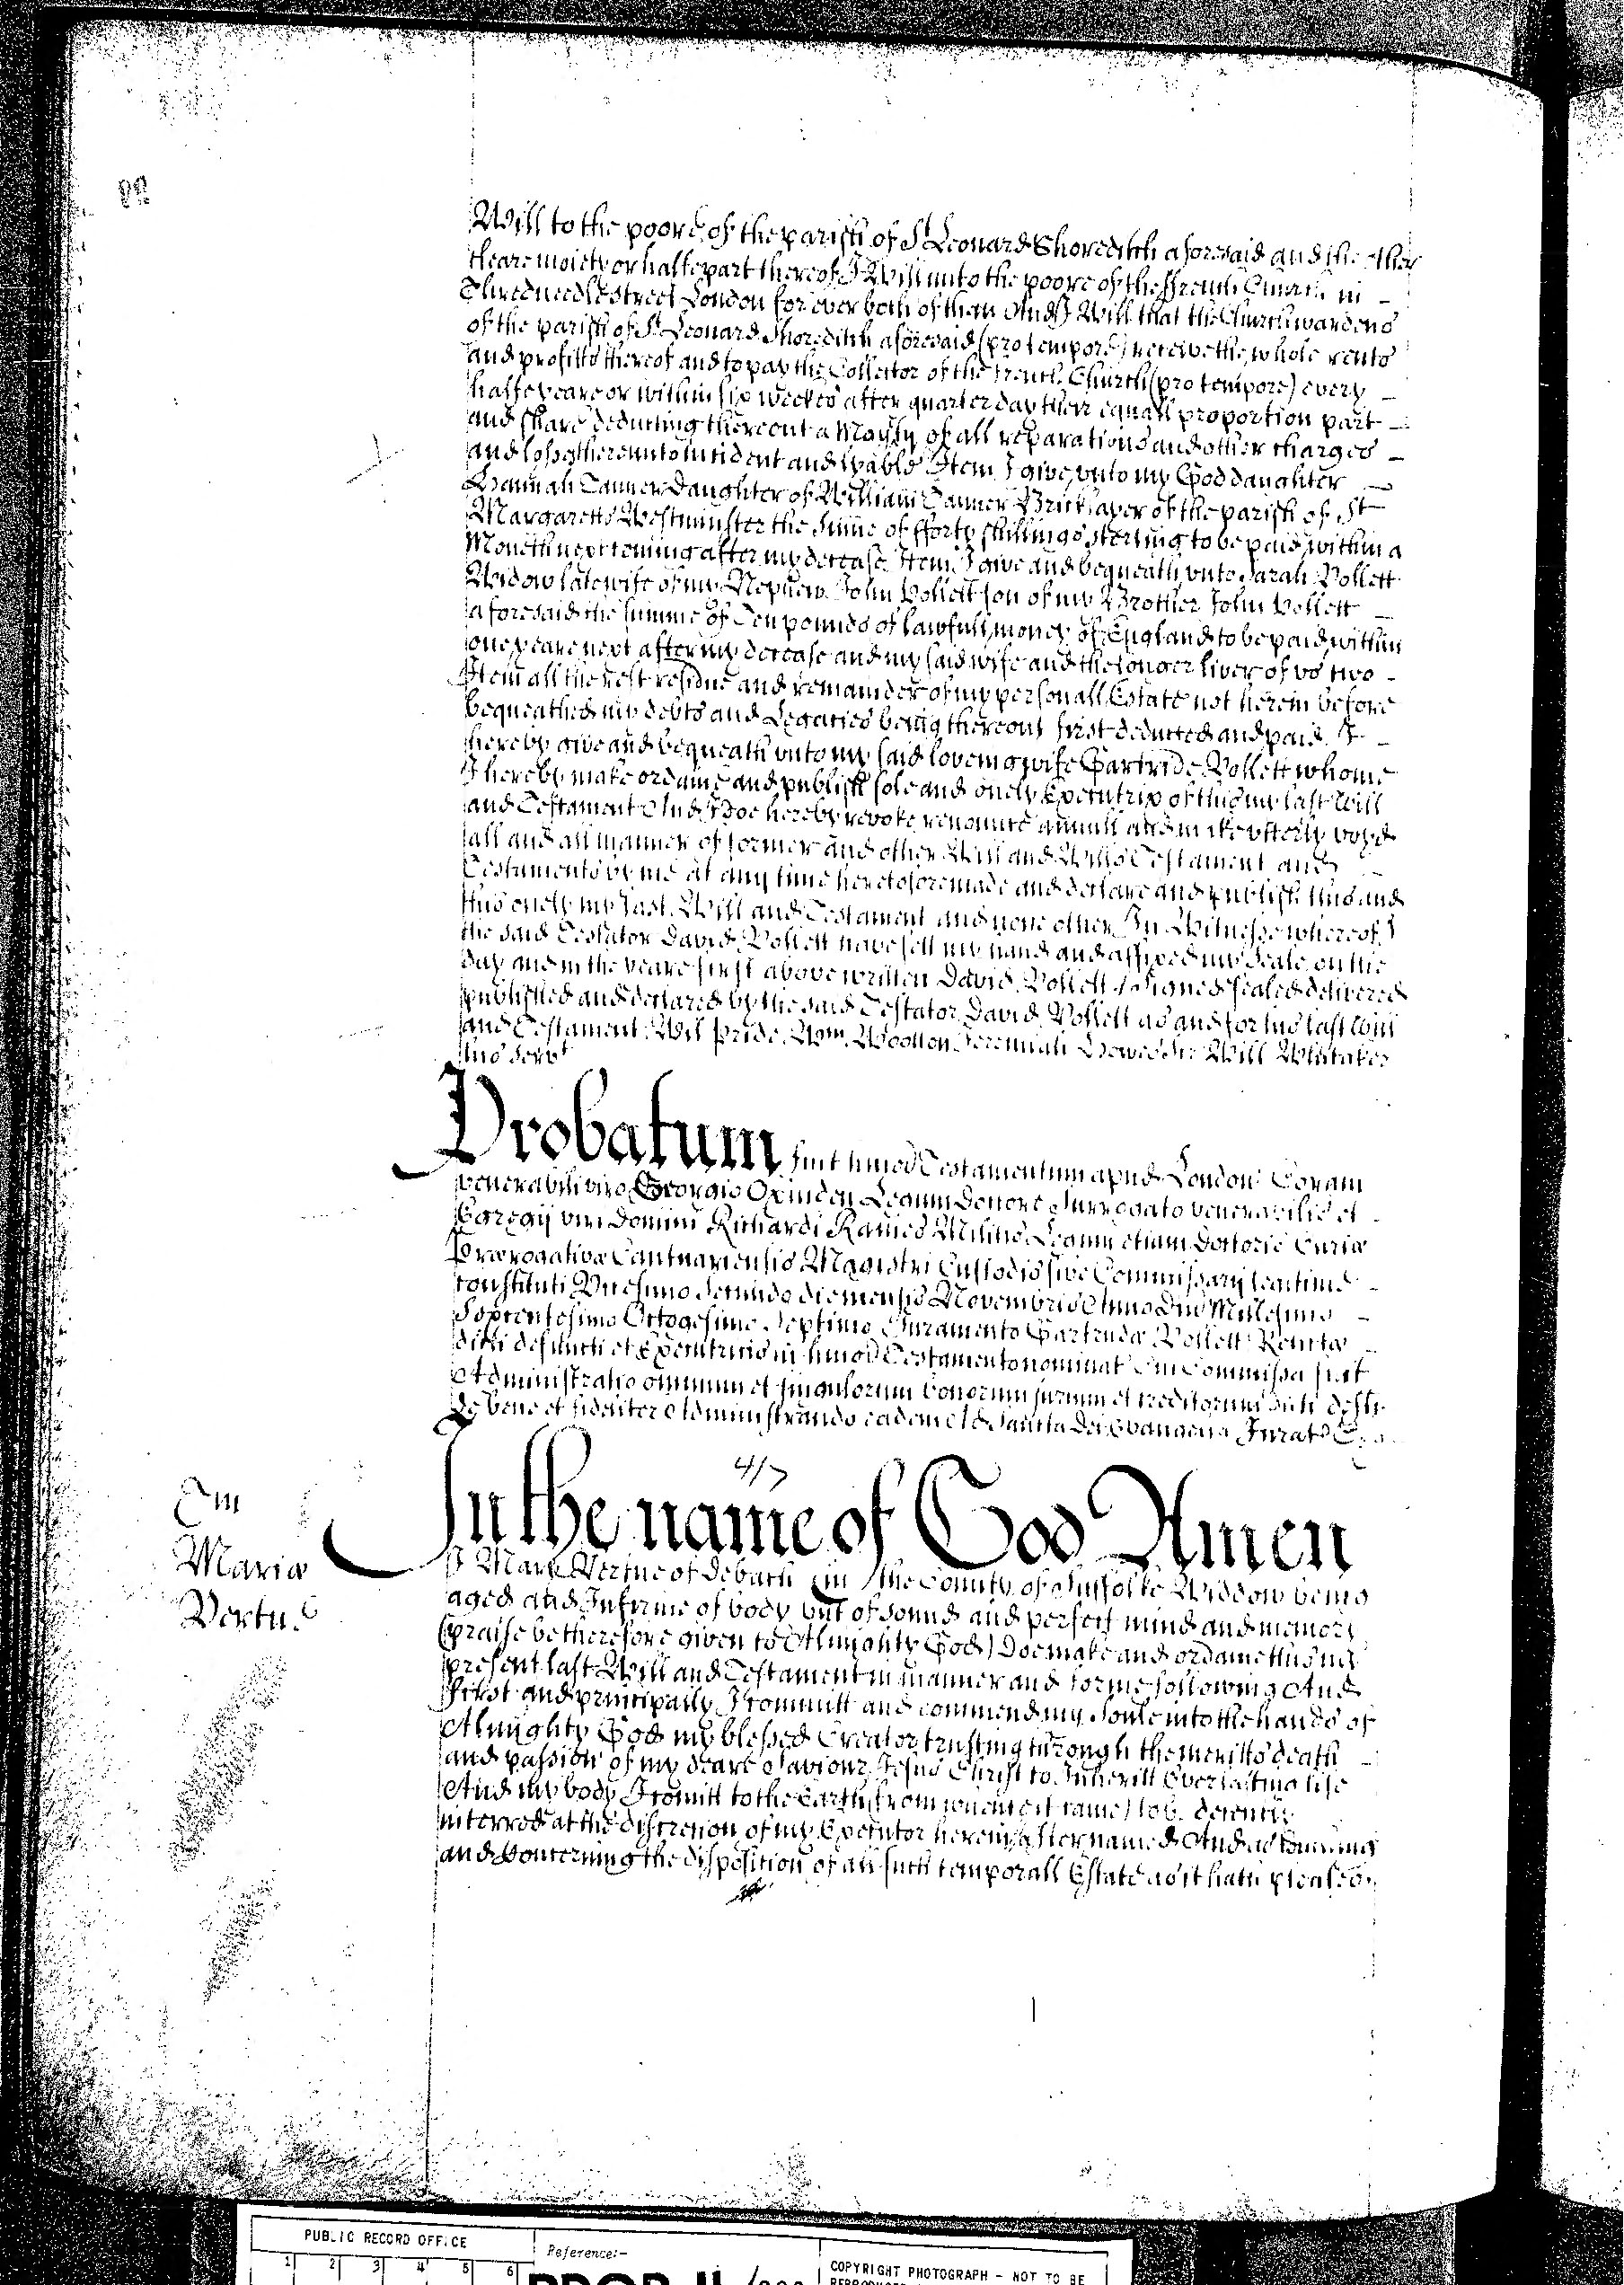 The will of Mary Vertue of 1686, page 1. The will mentions son Symon, daughters Mary and Martha, grandchildren Symon ??? and Christopher ??? as well as various ships